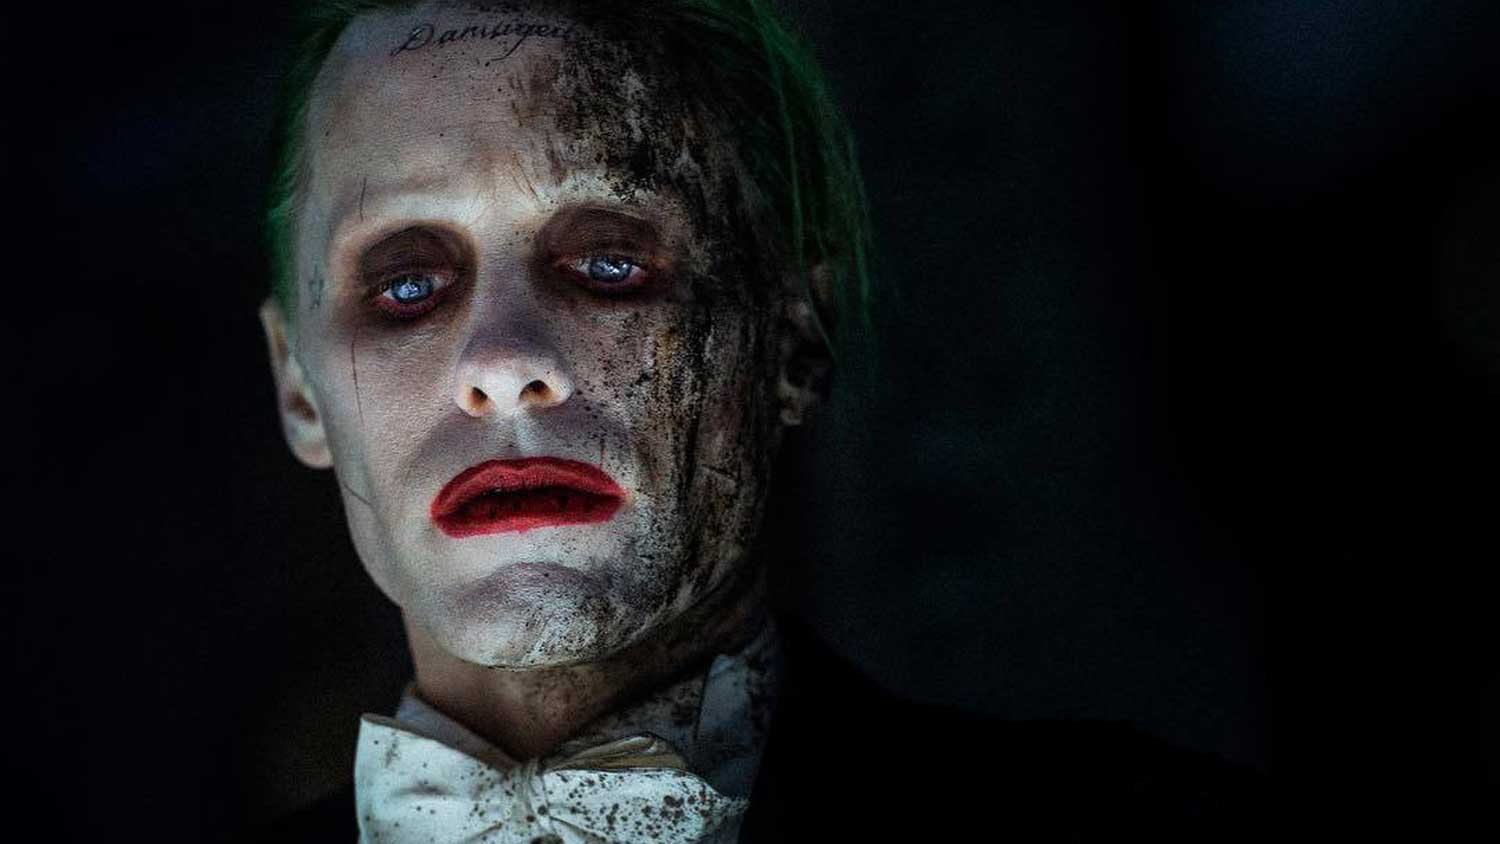 Jared-Leto-The-Joker-Suicide-Squad-Release-The-Ayer-Cut